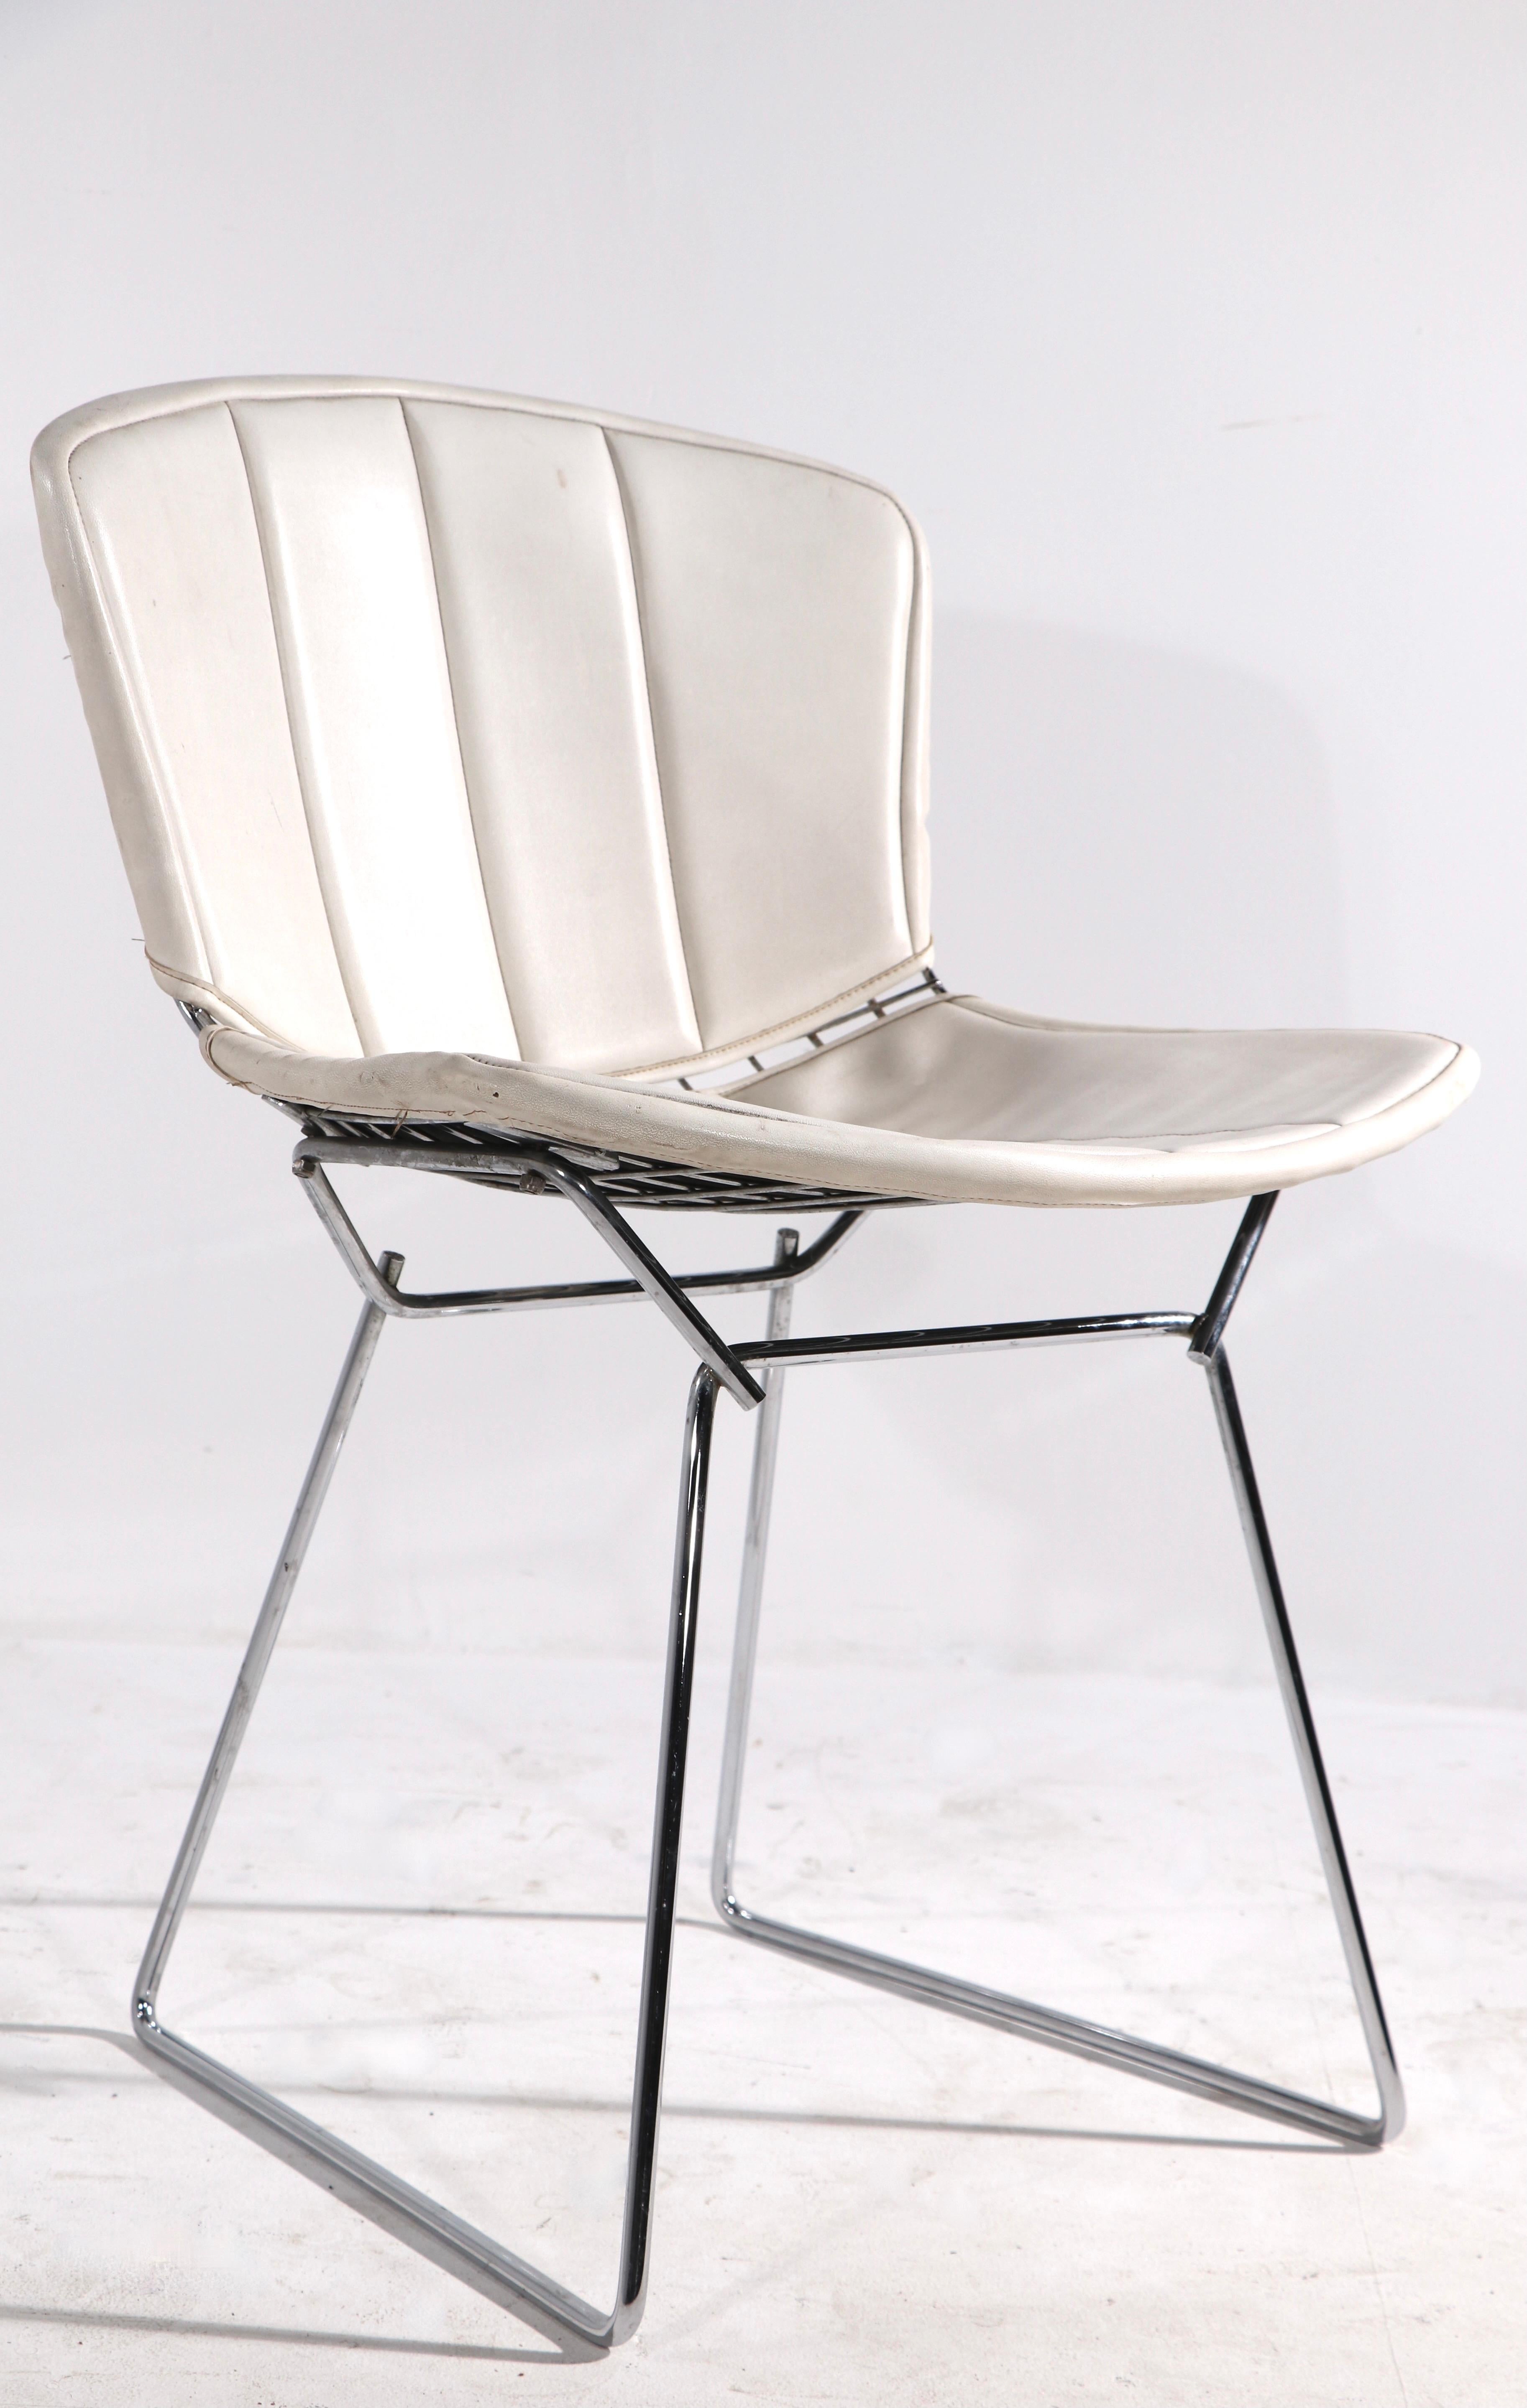 American Set of Four Chrome Dining Chairs by Bertoia for Knoll For Sale